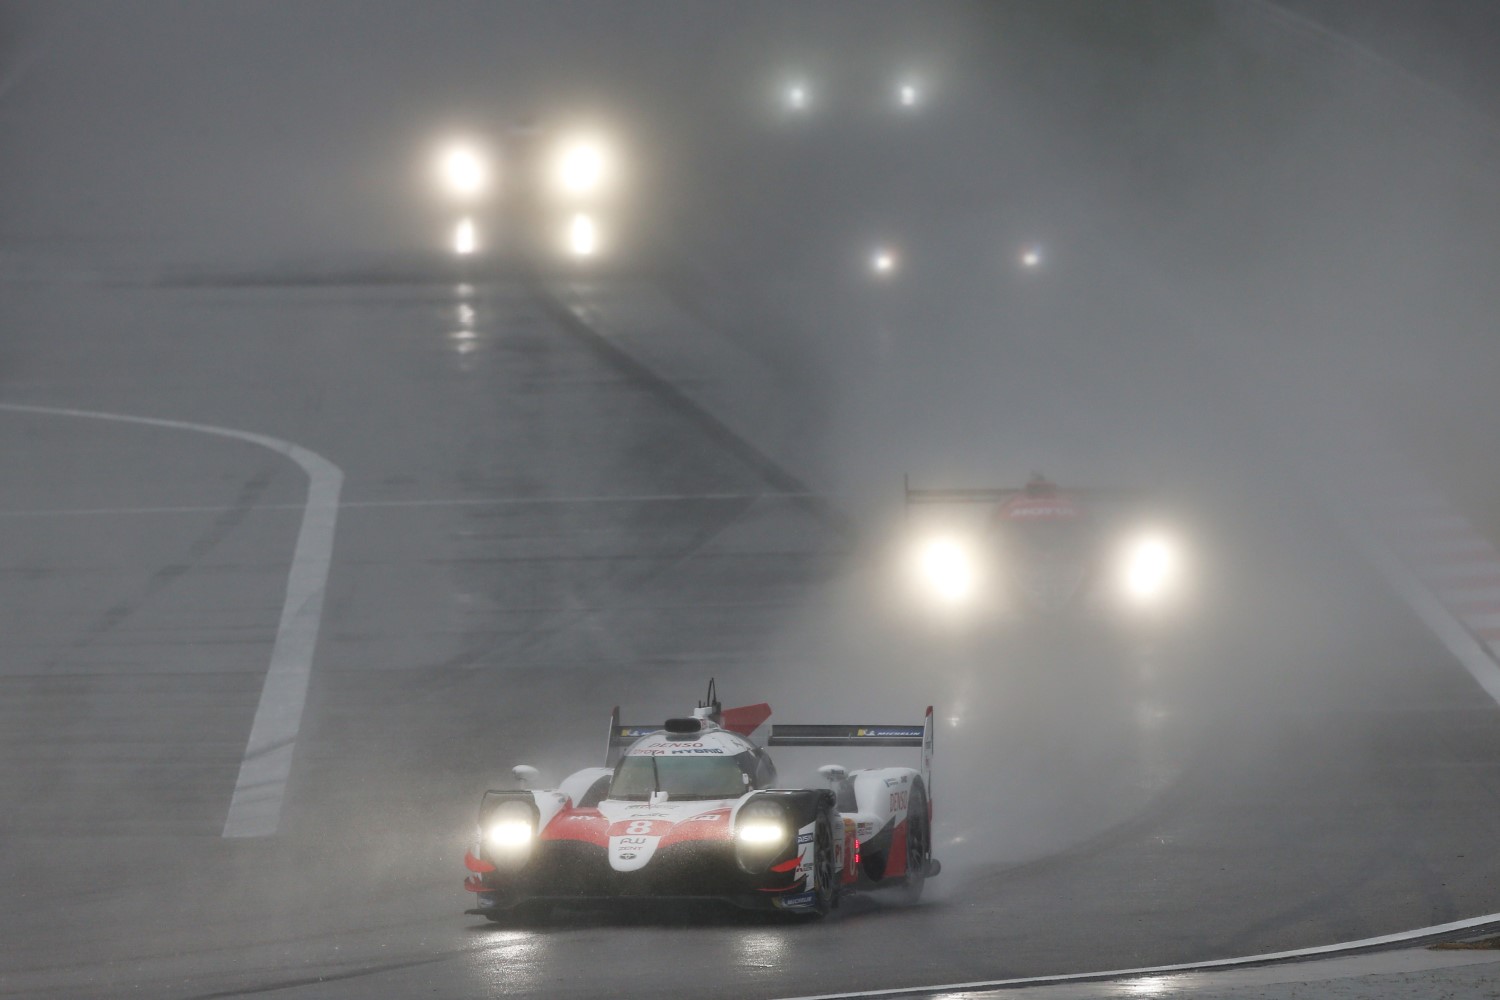 Alonso in the #8 Toyota in very bad rain conditions